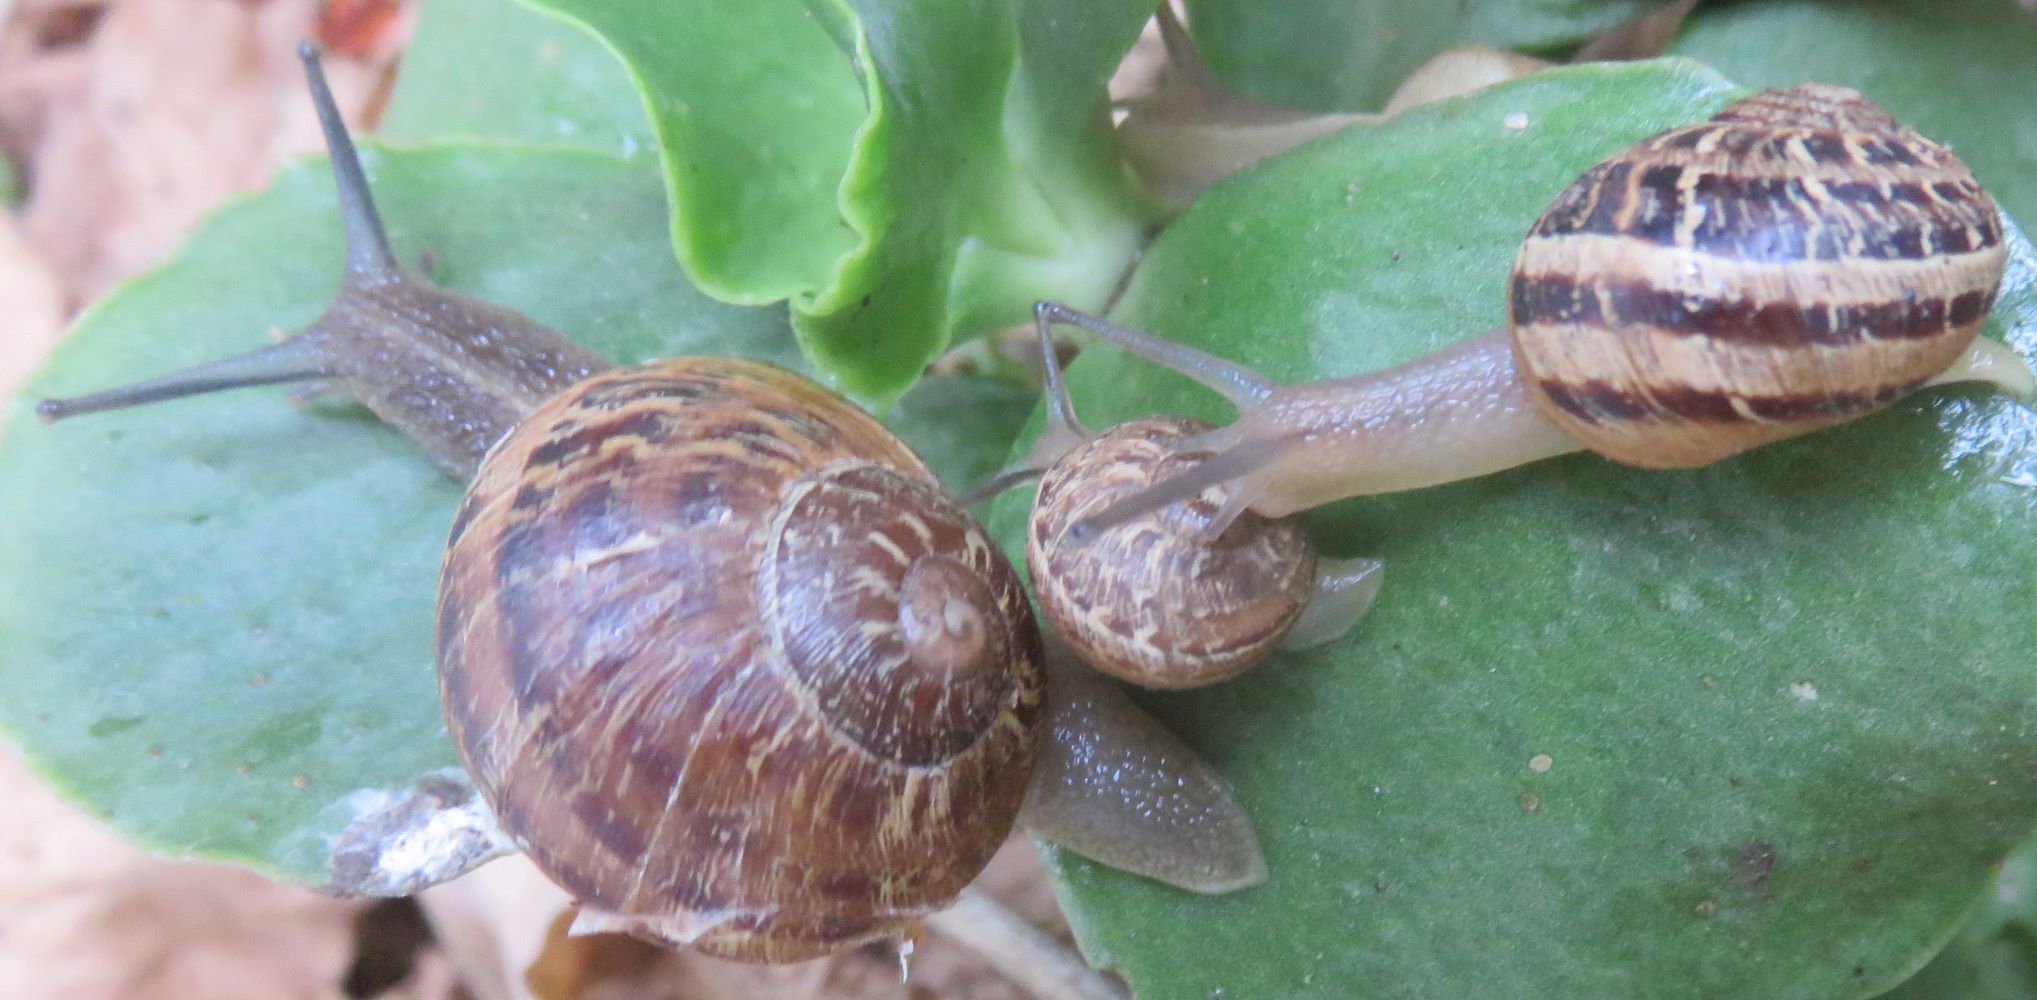 Snails grow to all sizes without detaching from the shell. Color variations show differences in diet.